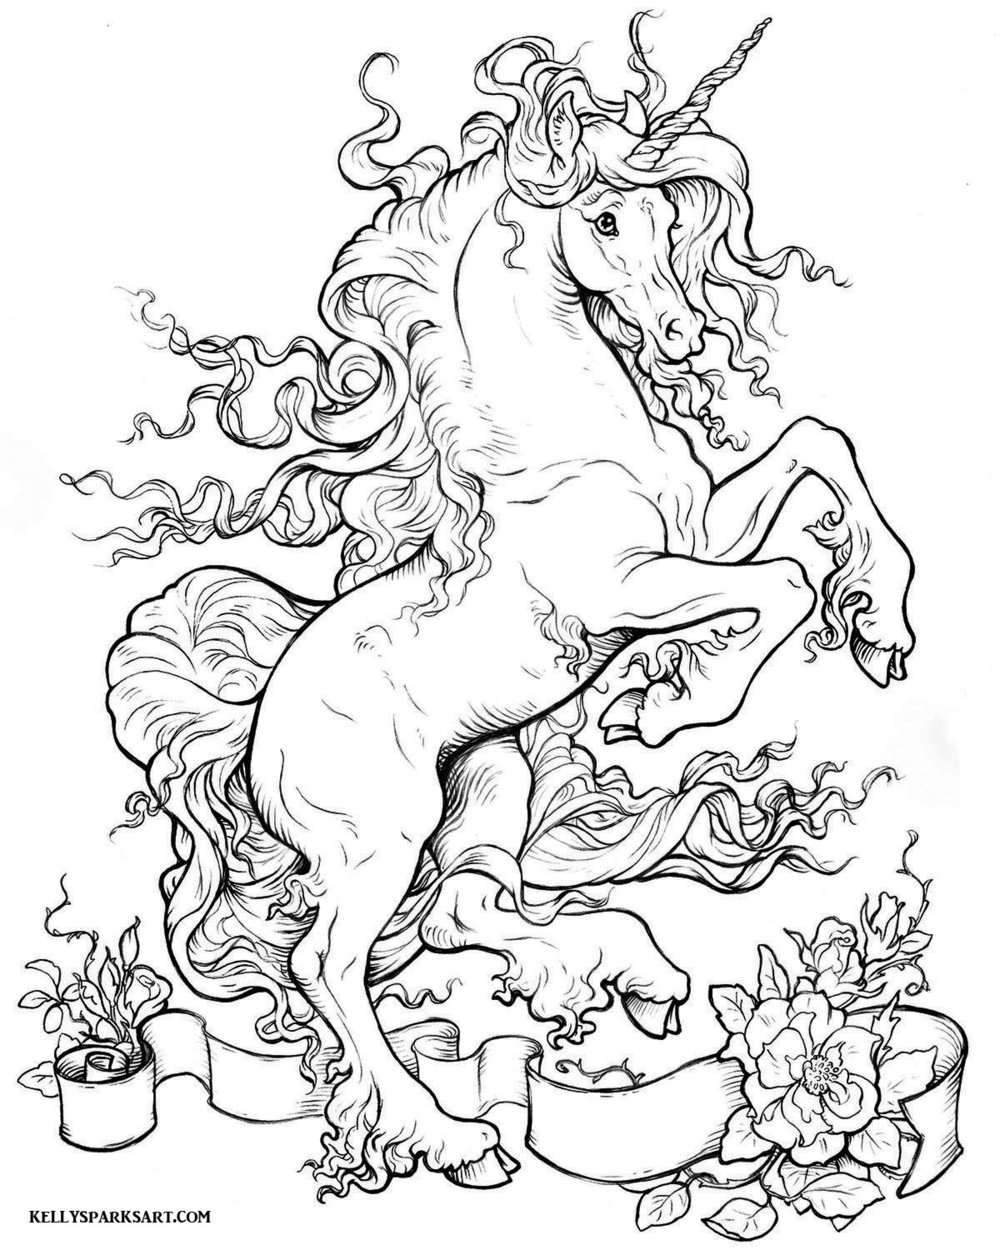 Unicorn Art Coloring Pages — Art of Kelly Sparks